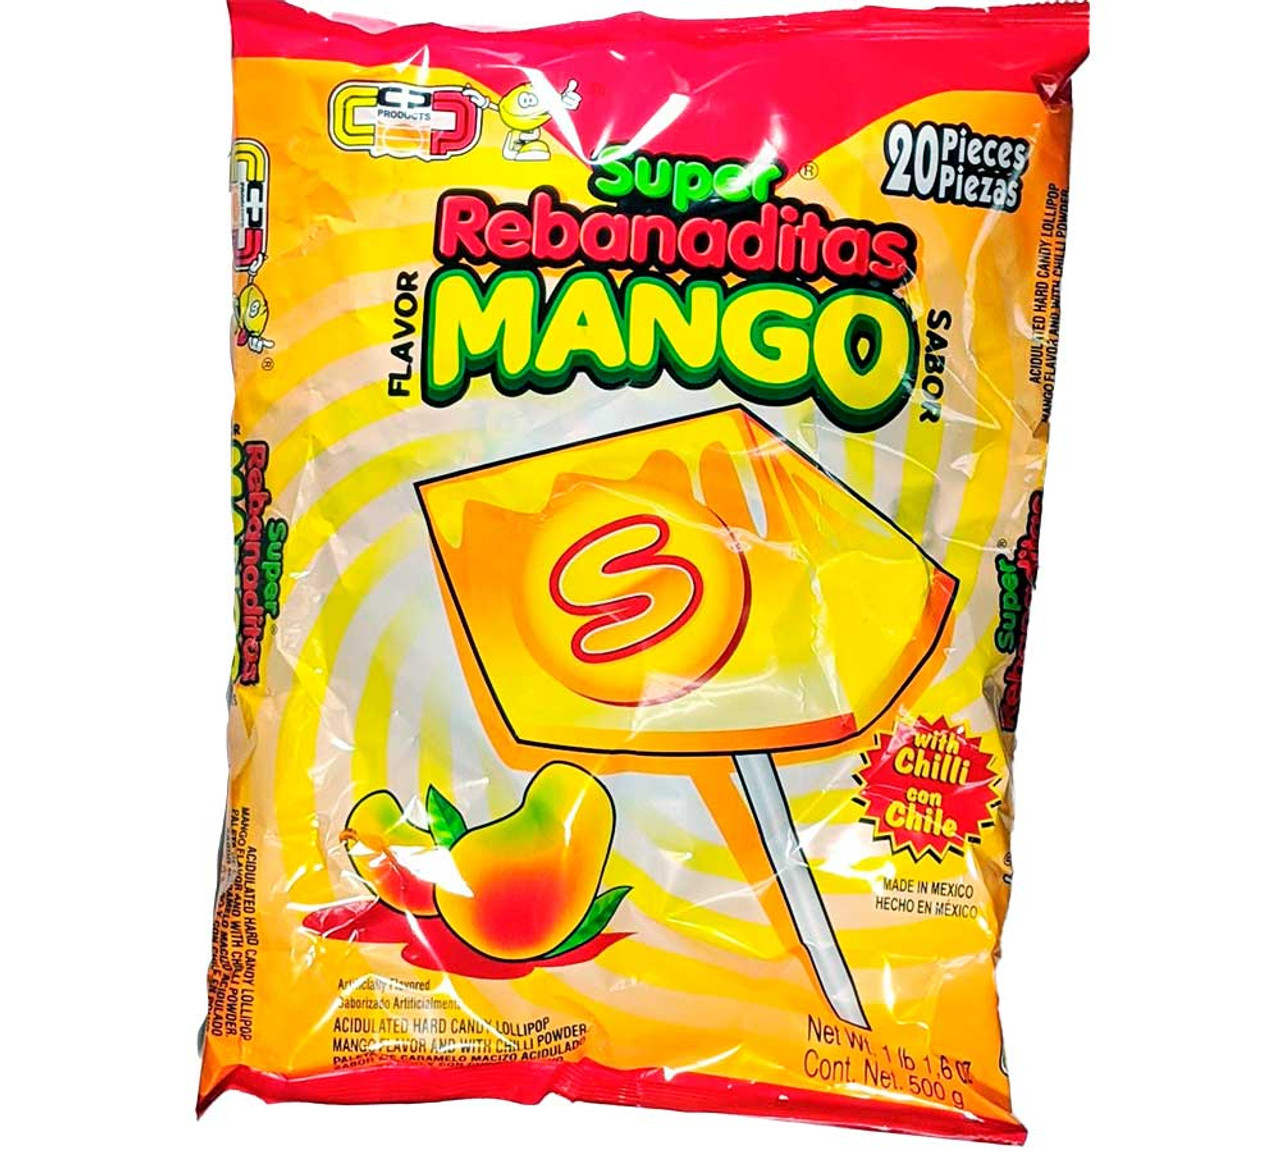 Hard candy lollipop in a square shape. This candy is Mango flavored and has a layer of spicy, salty and sour chili powder. The bag comes with 20 pieces per package.